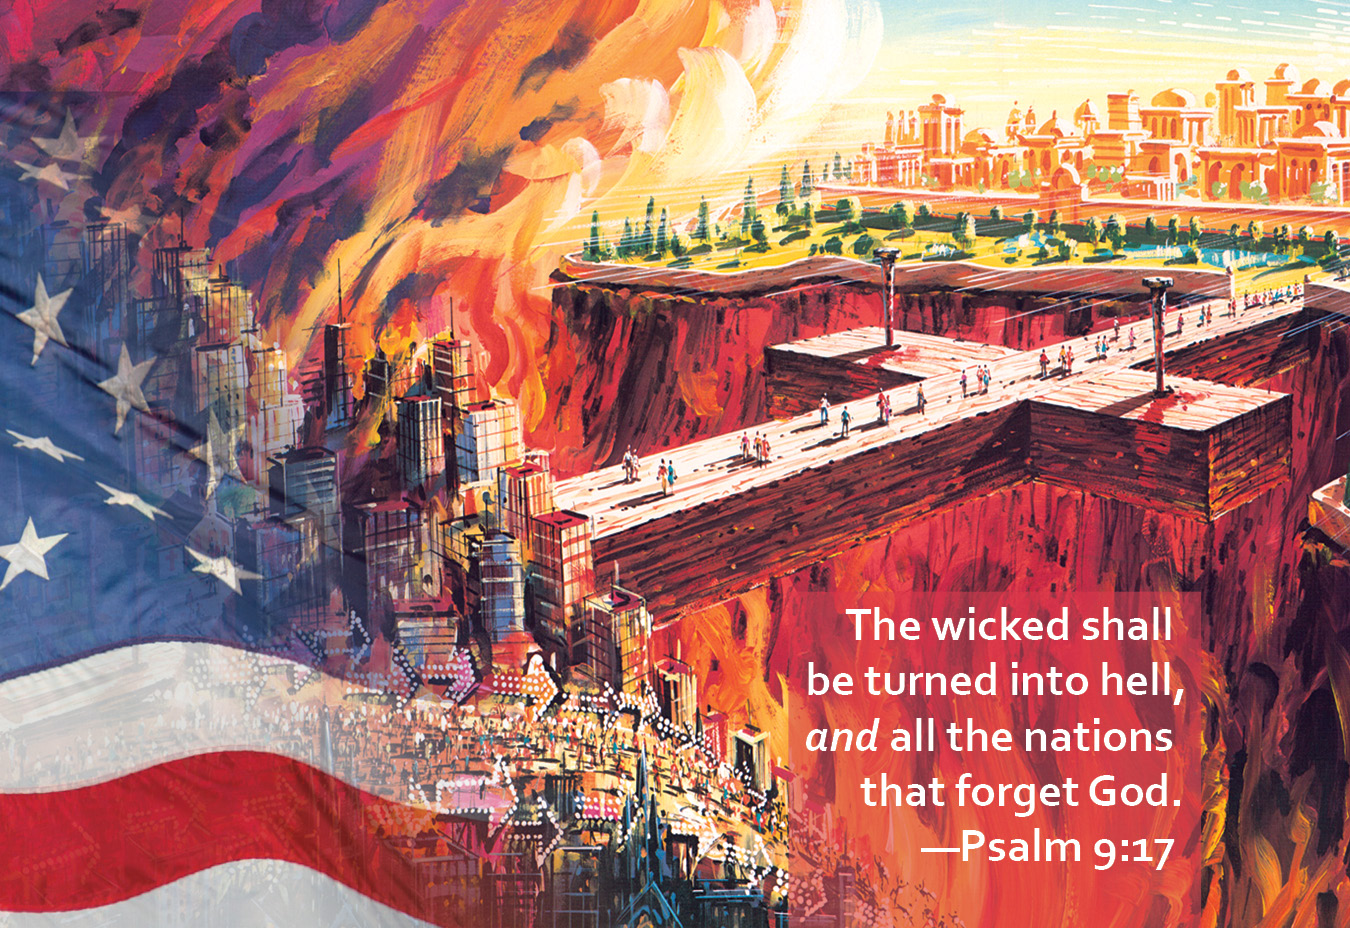 A cross over a burning abyss, with people coming to it, and some choosing to pass over into heaven and the rest falling off into hell. American flag in one corner, and the words "The wicked shall be turned into hell, and all the nations that forget God.—Psalm 9:17"